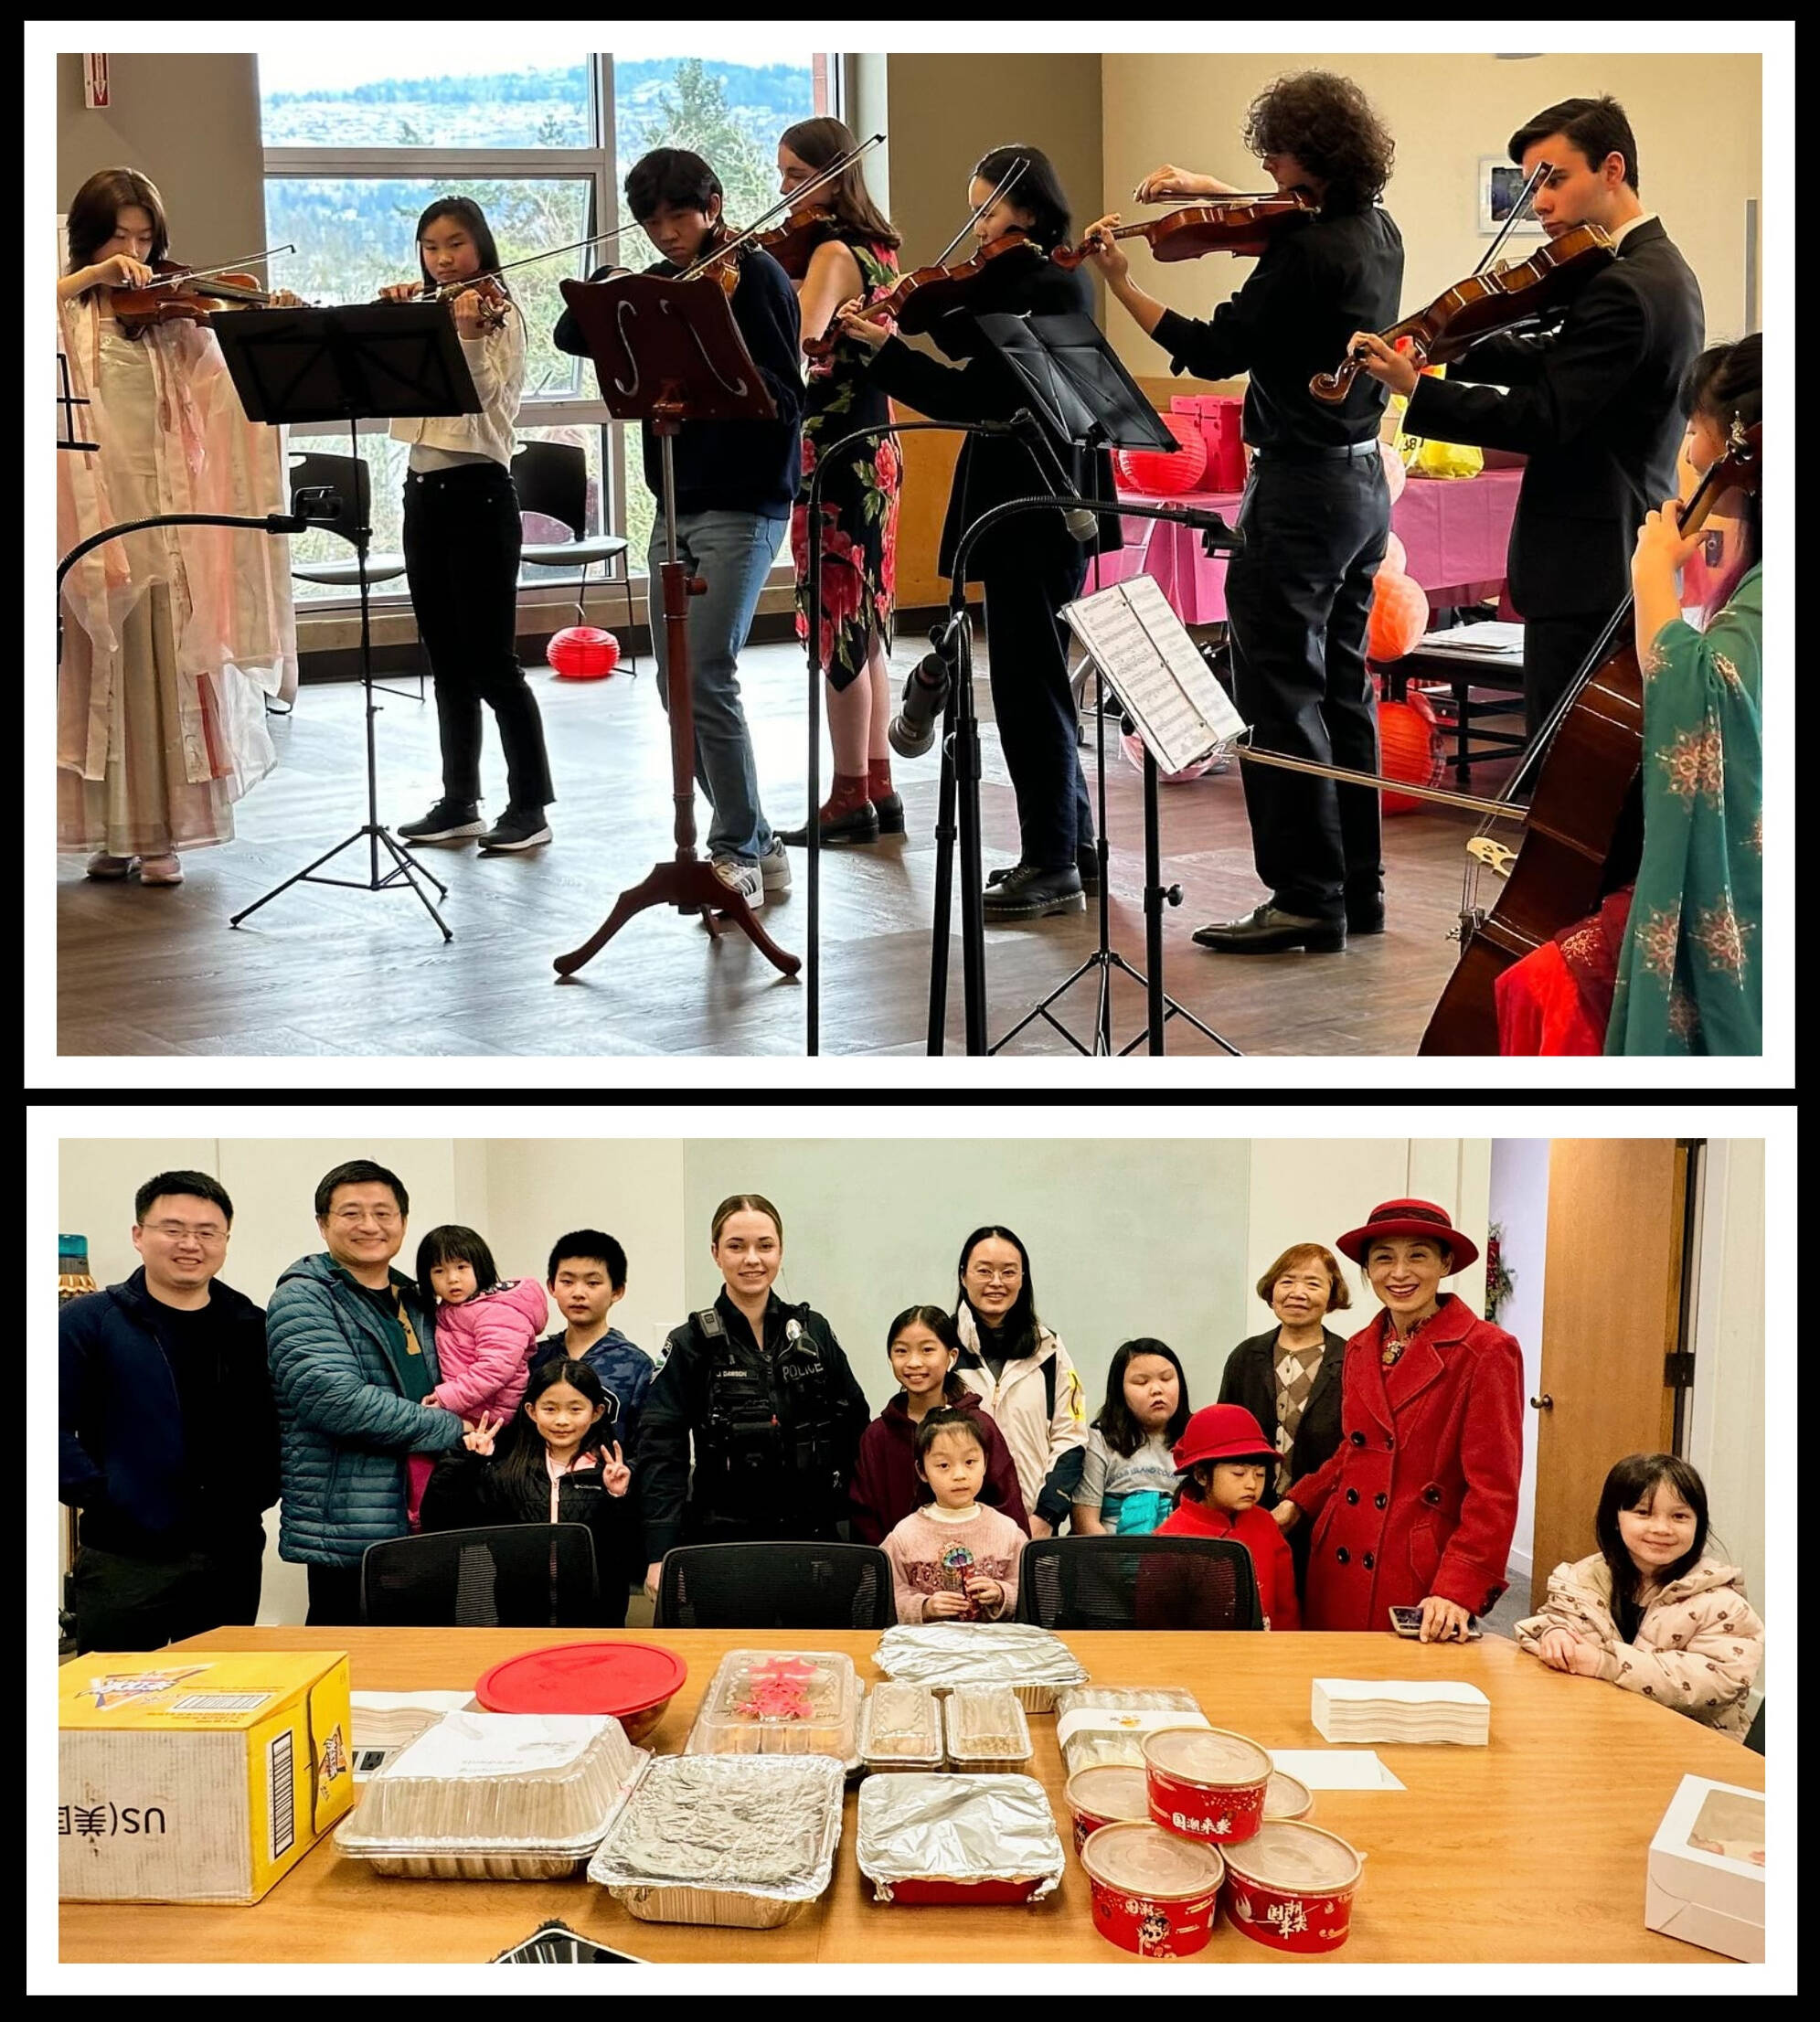 Top: The city of Mercer Island and Mercer Island Chinese Association presented a Lunar New Year Celebration at the community and event center on Feb. 11. Mercer Island School District staff members were present to visit with attendees, eight Islander Middle School orchestra students performed three songs and Mercer Island High School junior Chloe Yang held a fundraiser that directly supports the Asian Counseling and Referral Service, which recently lost 1.4 tons of frozen food during a power outage. Bottom: Several Mercer Island families recently came together to cook local police officers a homemade dinner to celebrate the Lunar New Year. Photos courtesy of the Mercer Island School District and city of Mercer Island